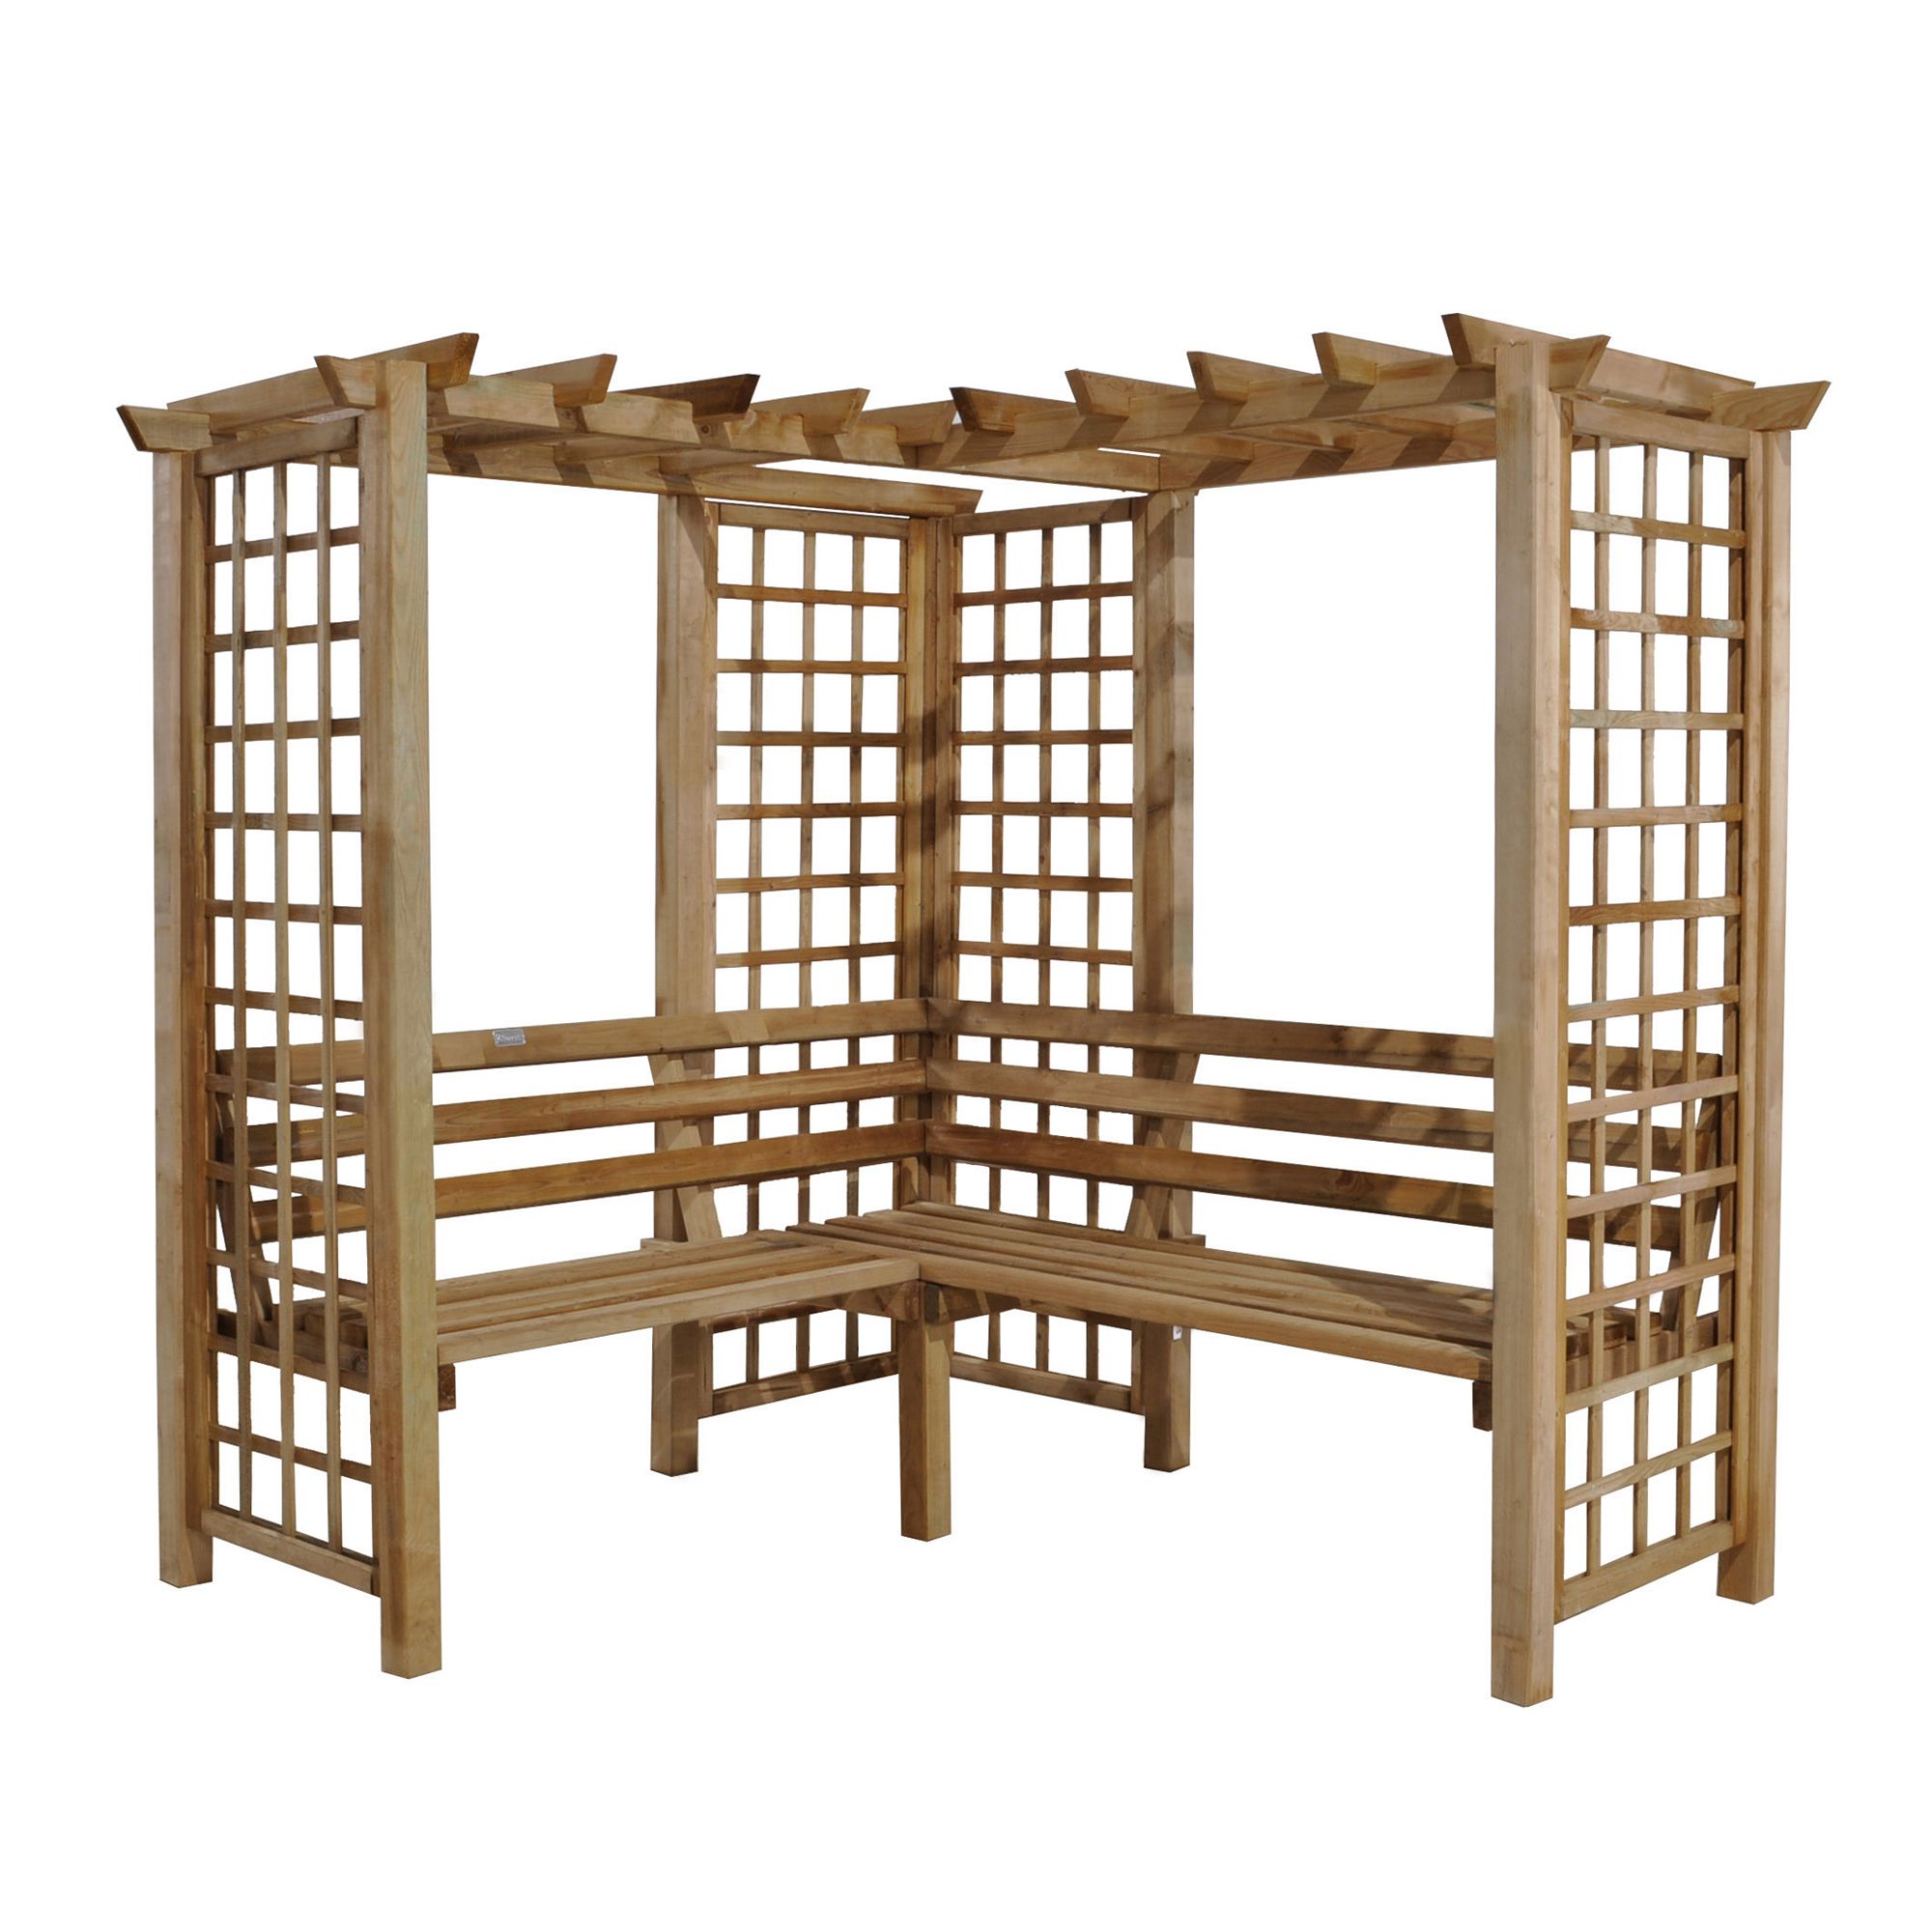 Forest Garden Forest Sorrento Trellis Arbour, (H)2170mm (W)1990mm (D)2020mm - Assembly Required